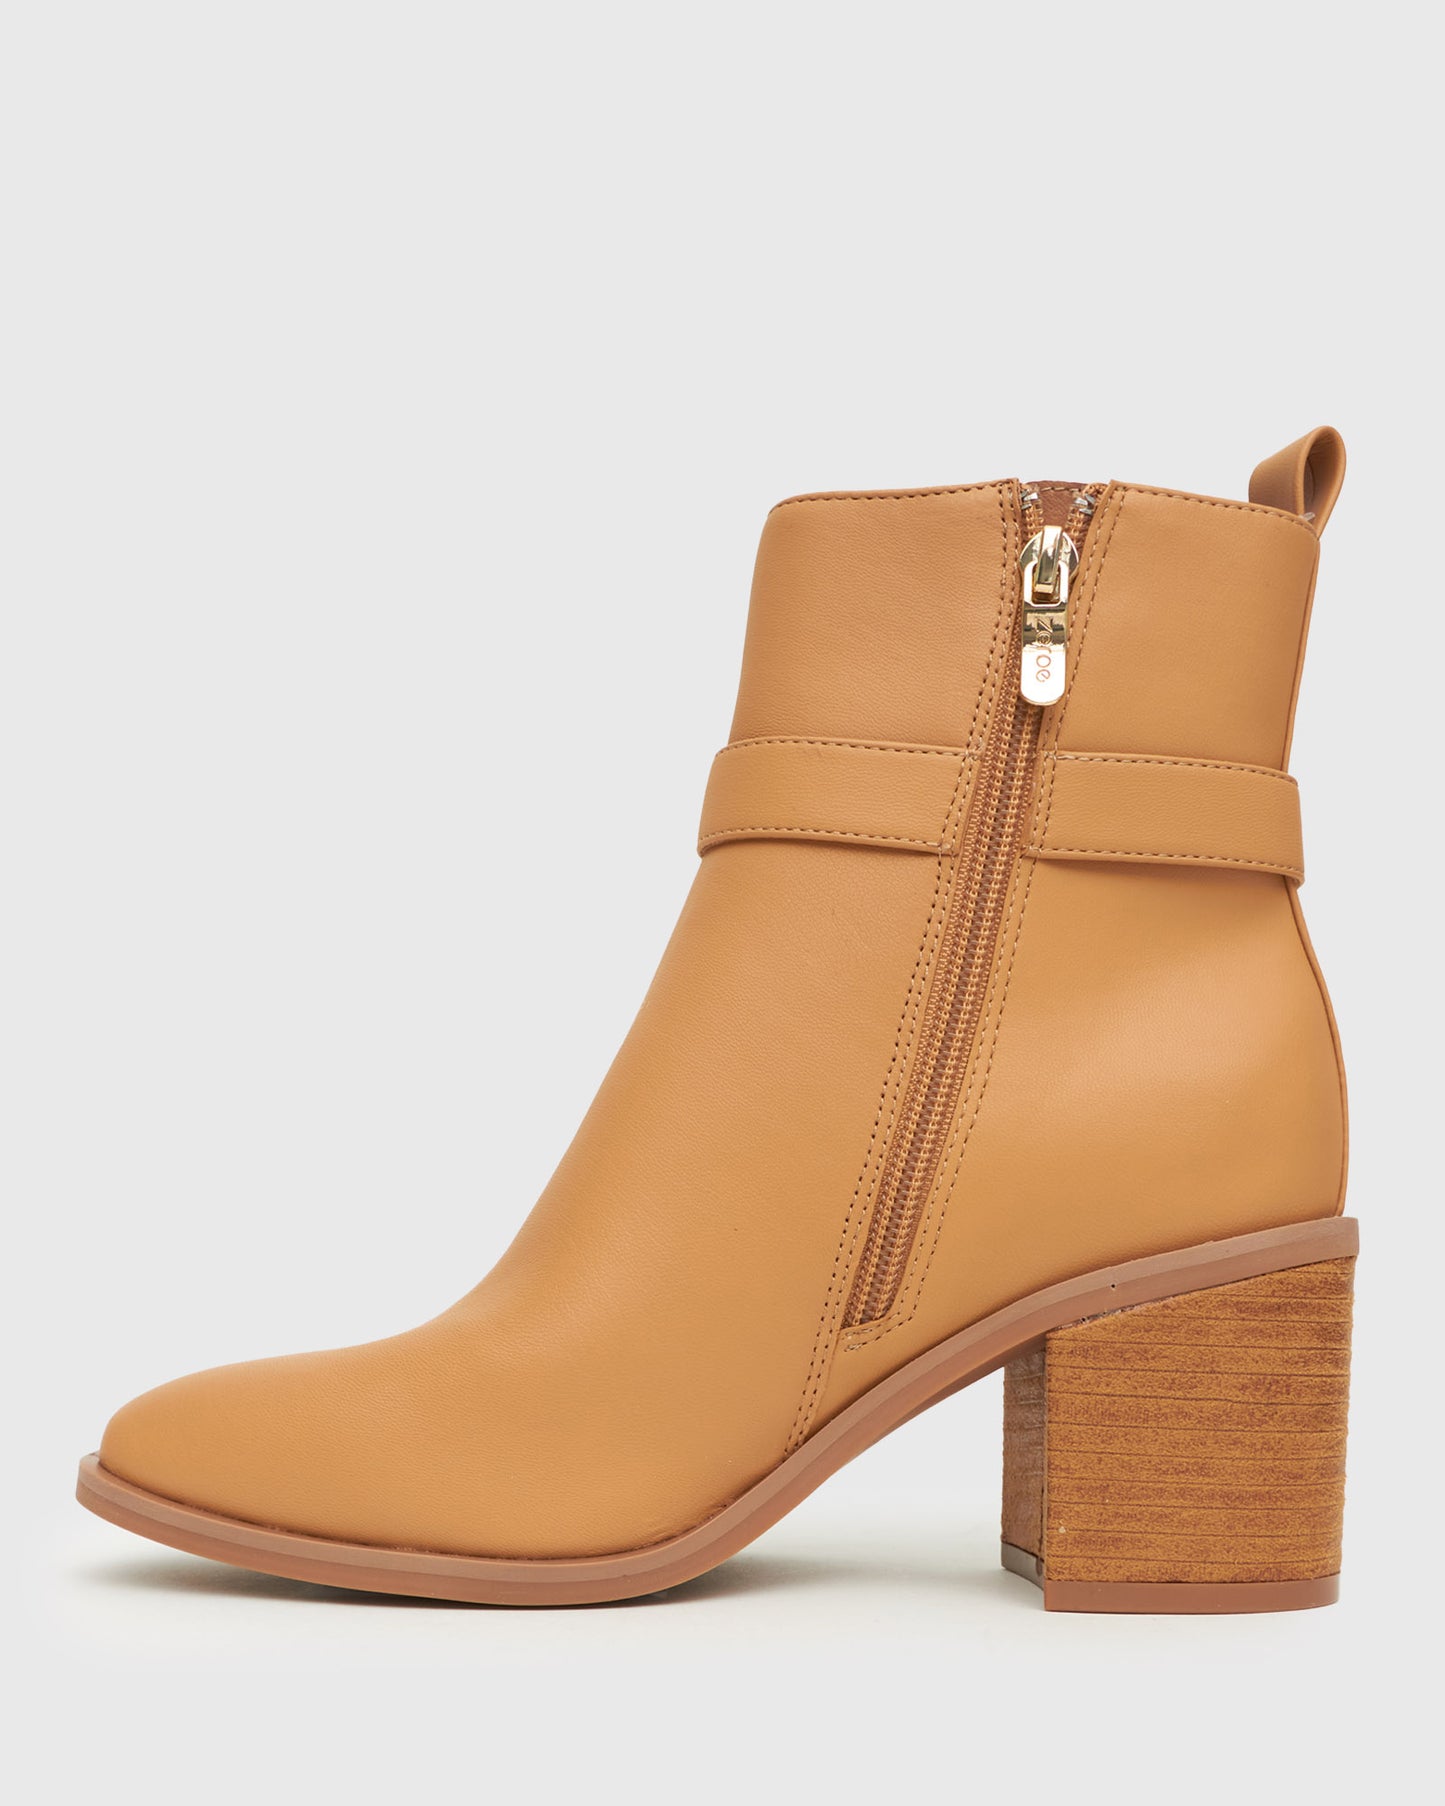 GILLY Buckled Strap Ankle Boots